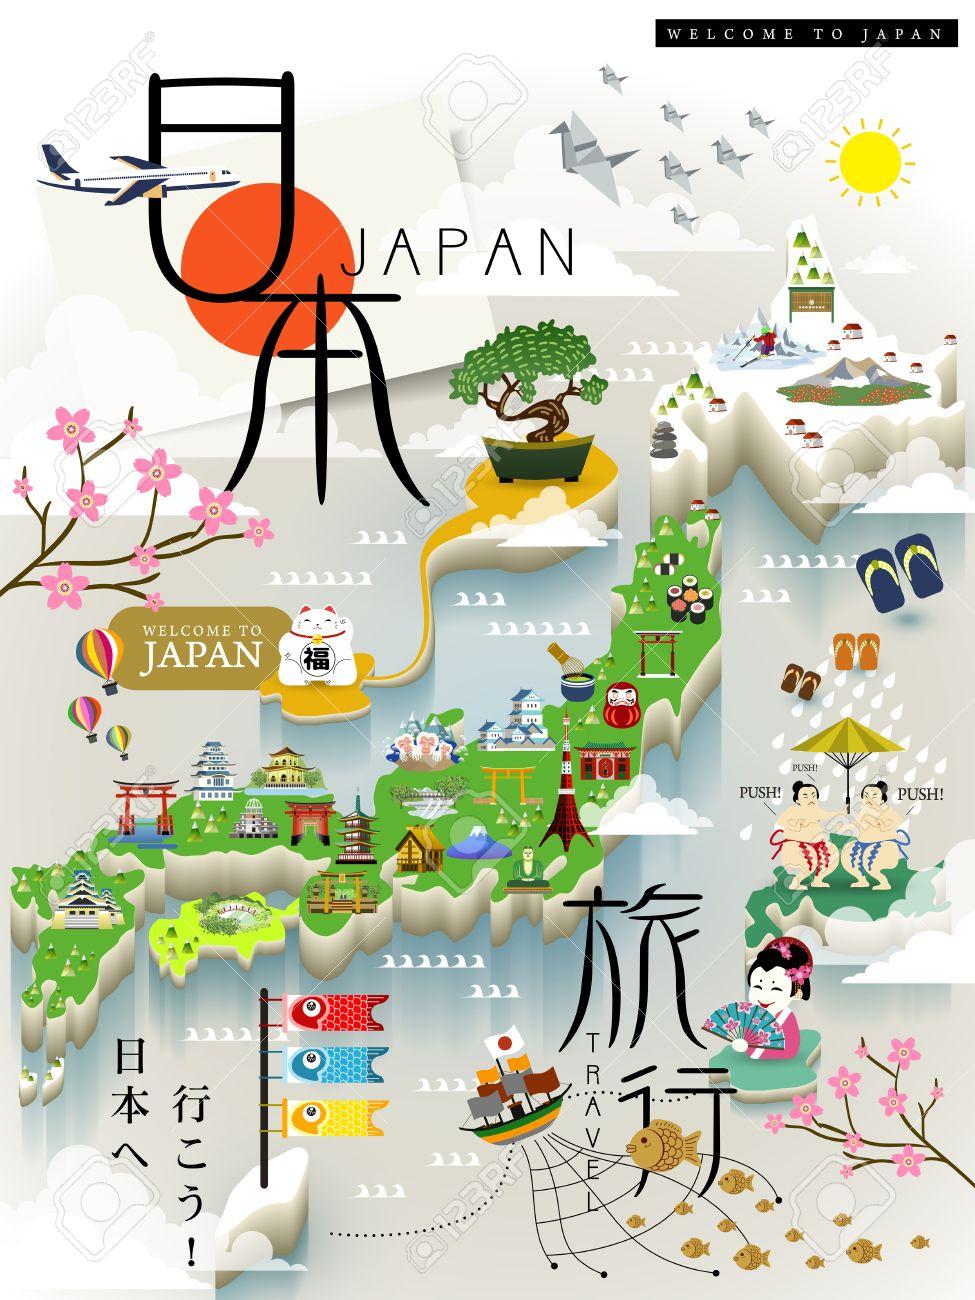 Japan Map Attractions